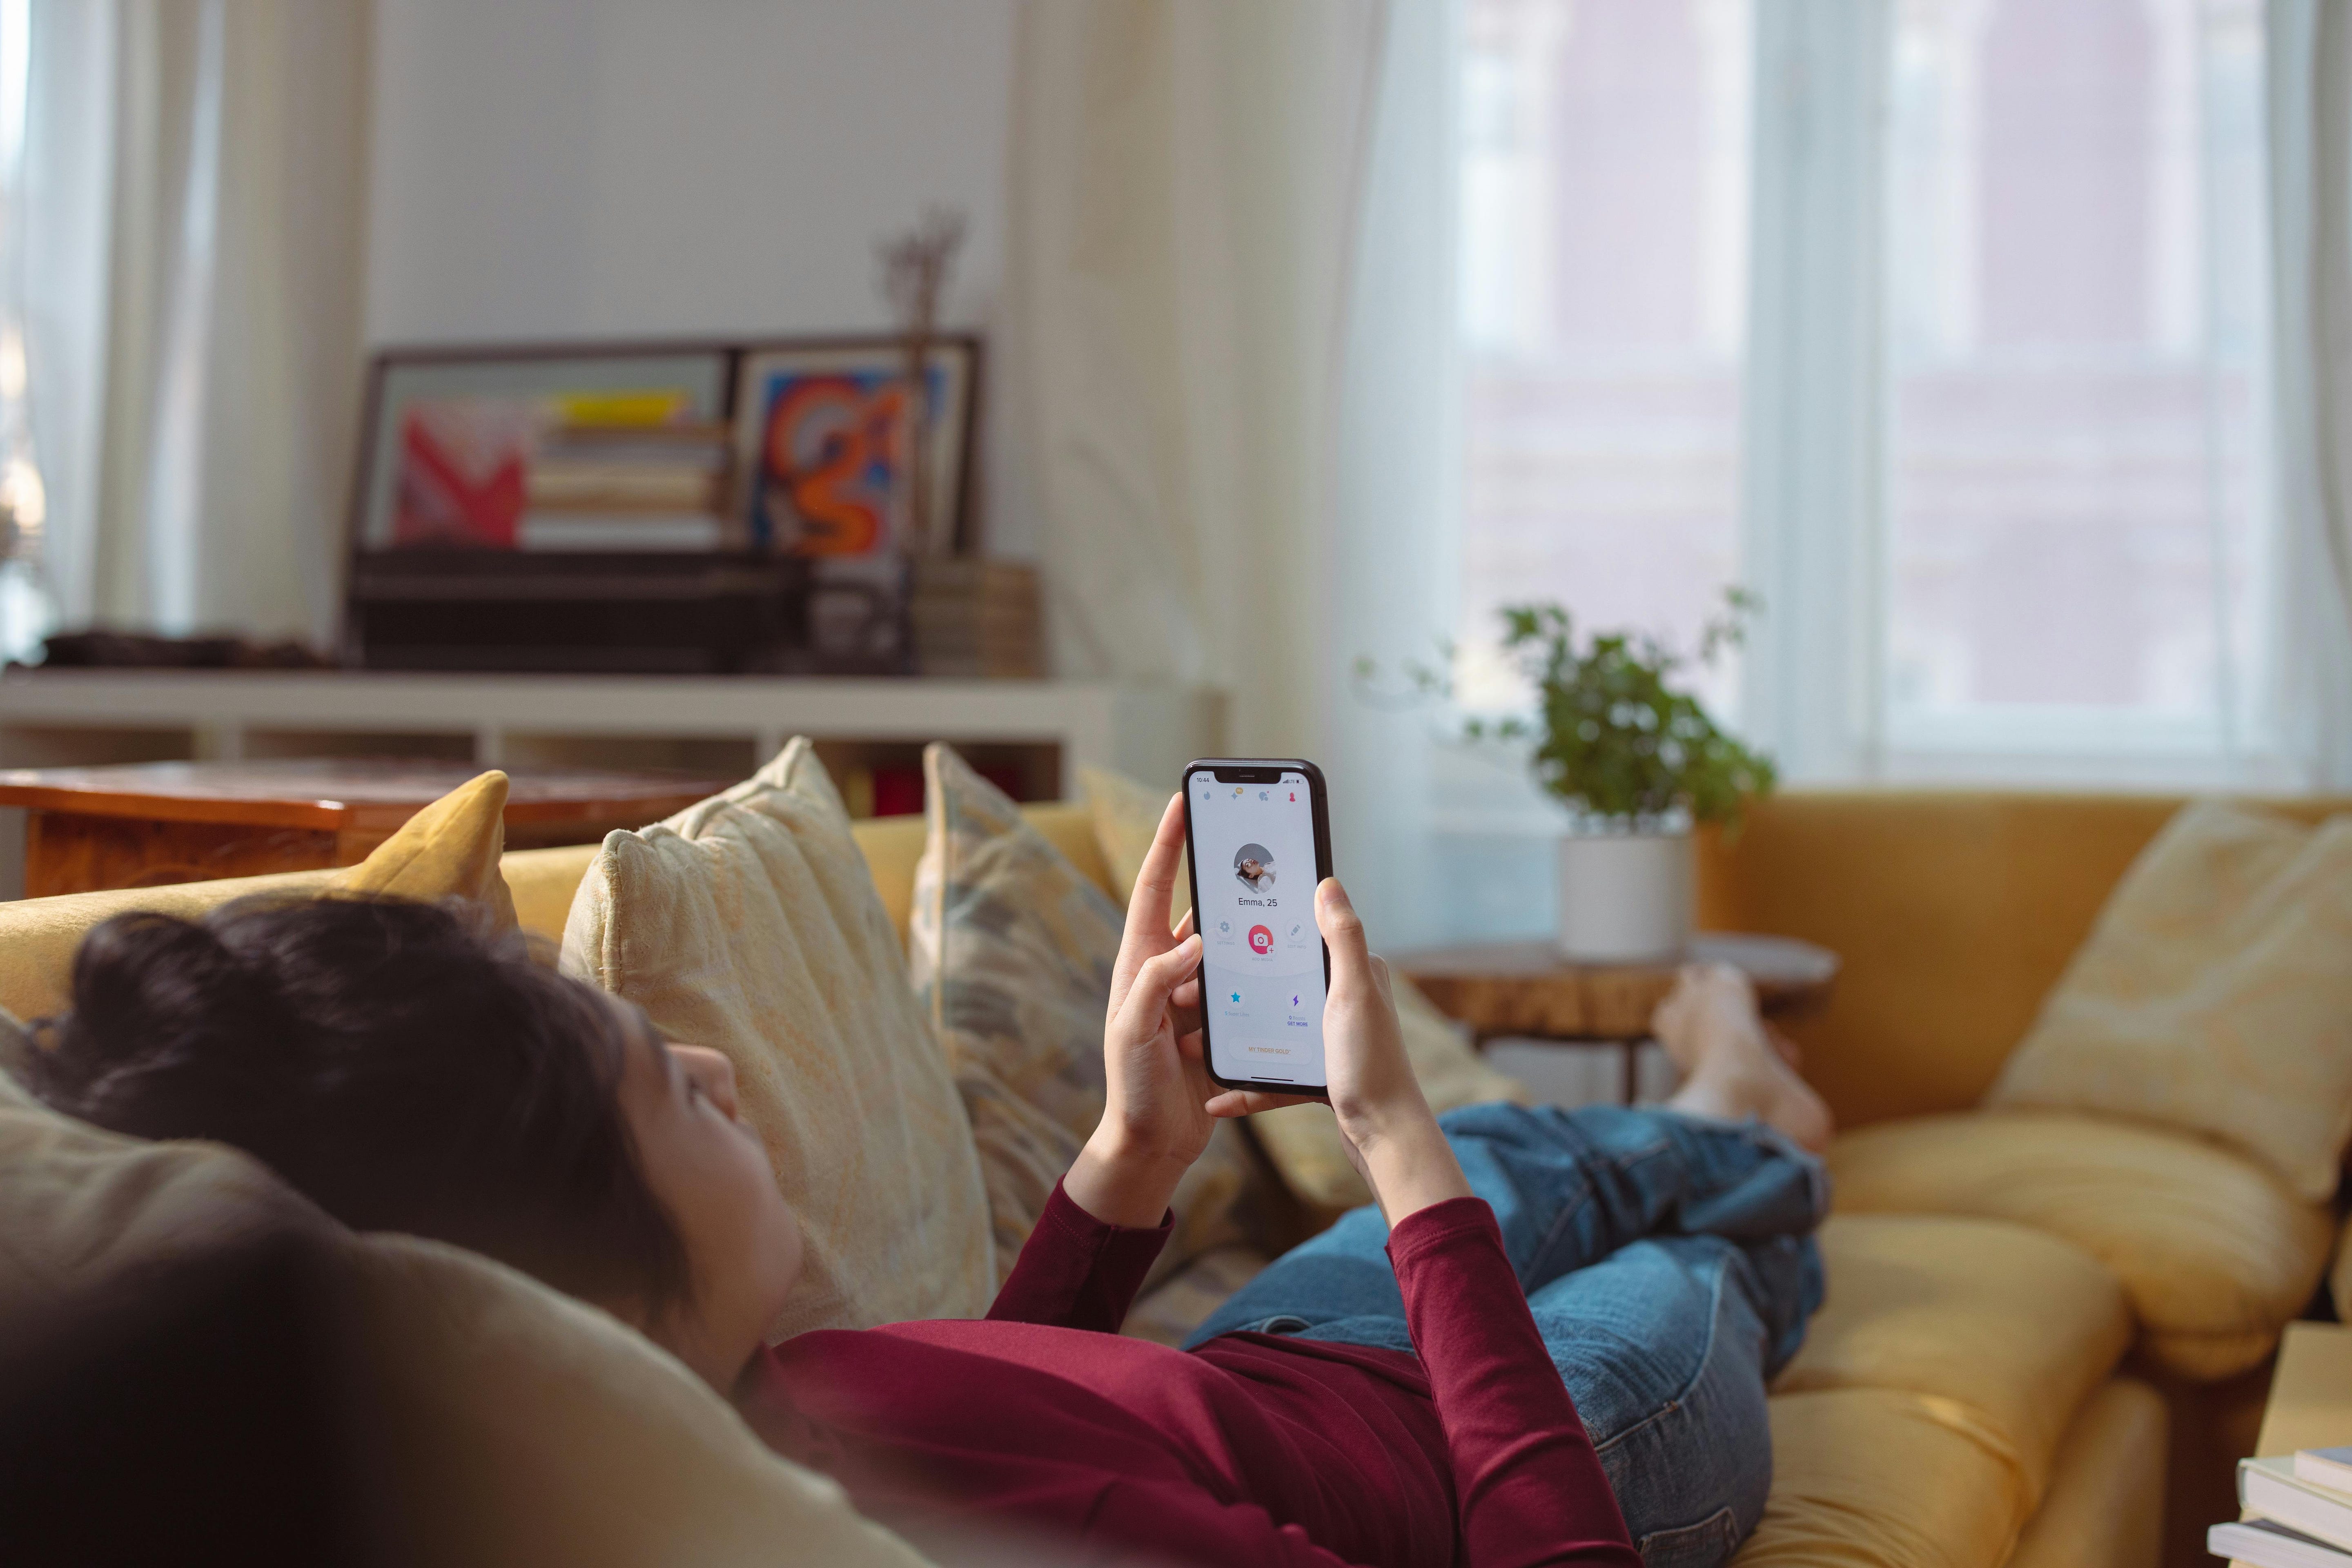 Woman laying on couch using dating app